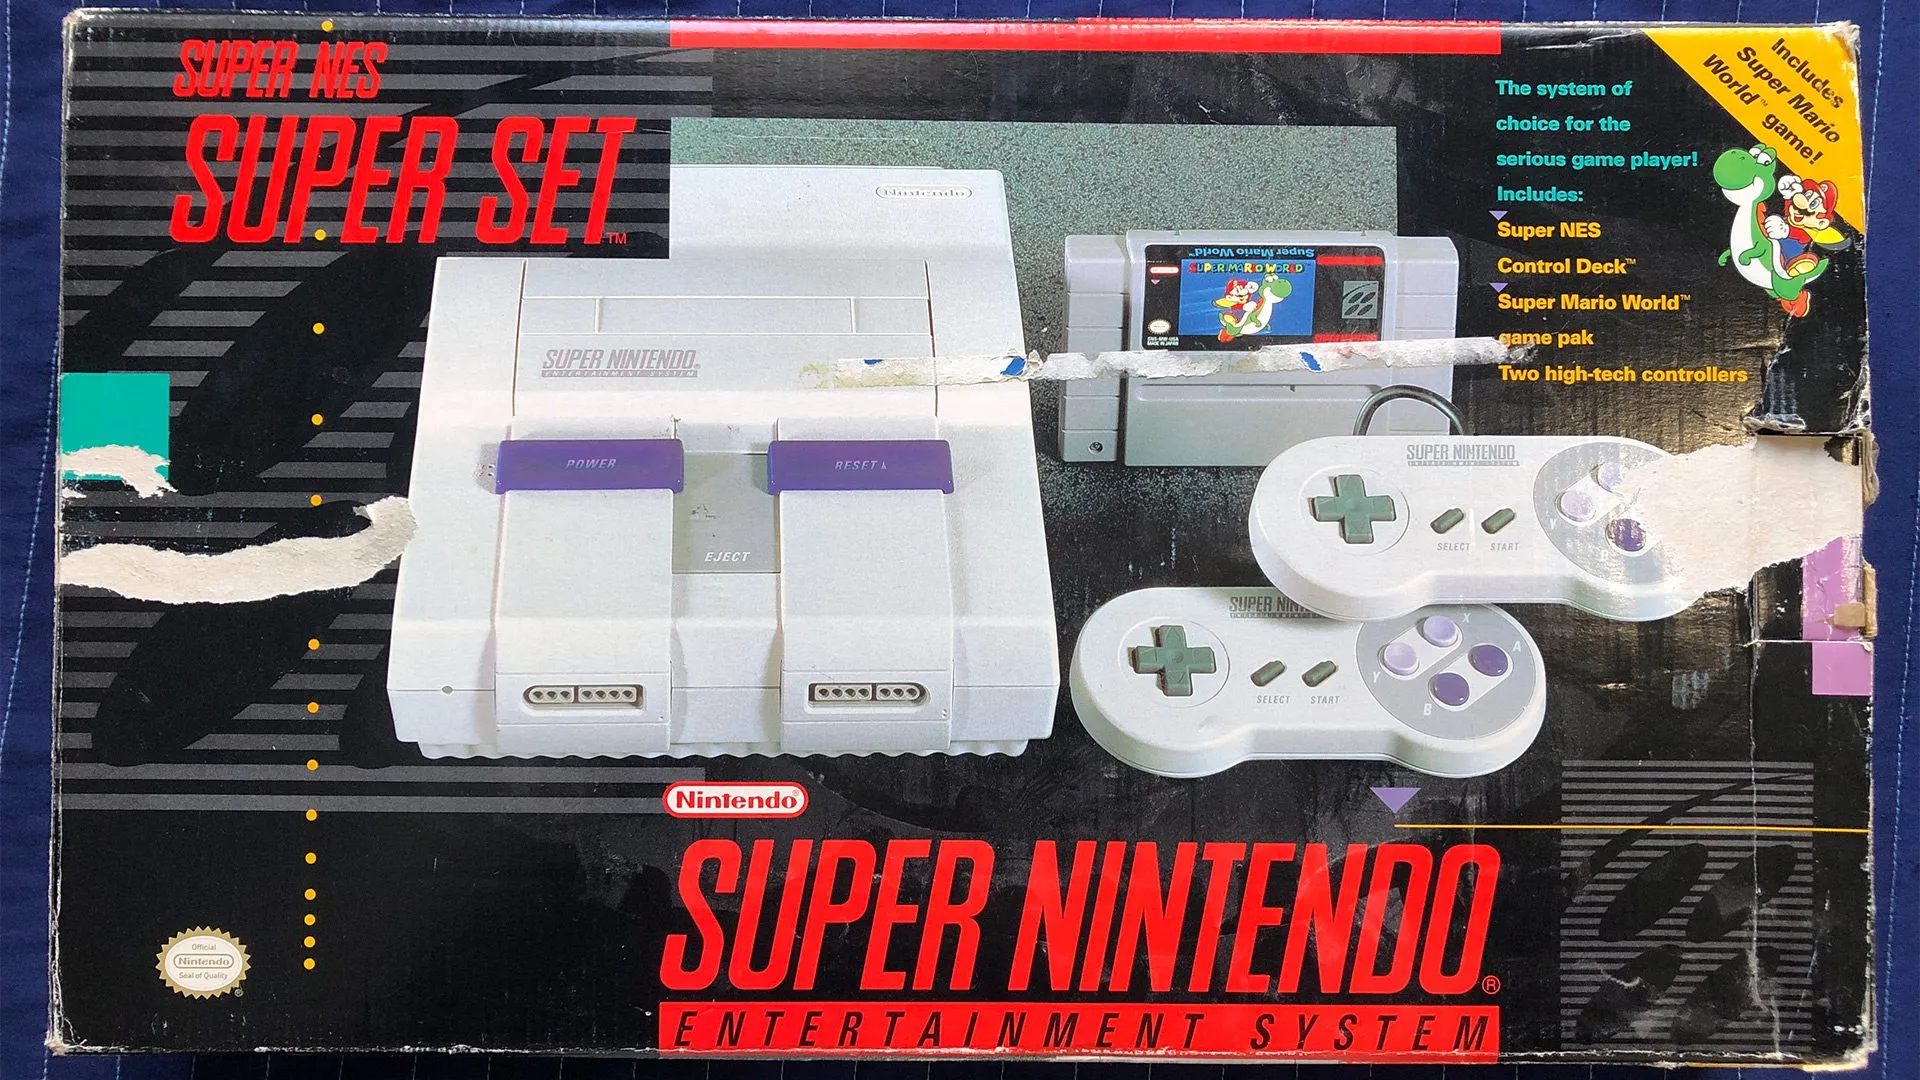 30 years later, Super Nintendo still an all-time console